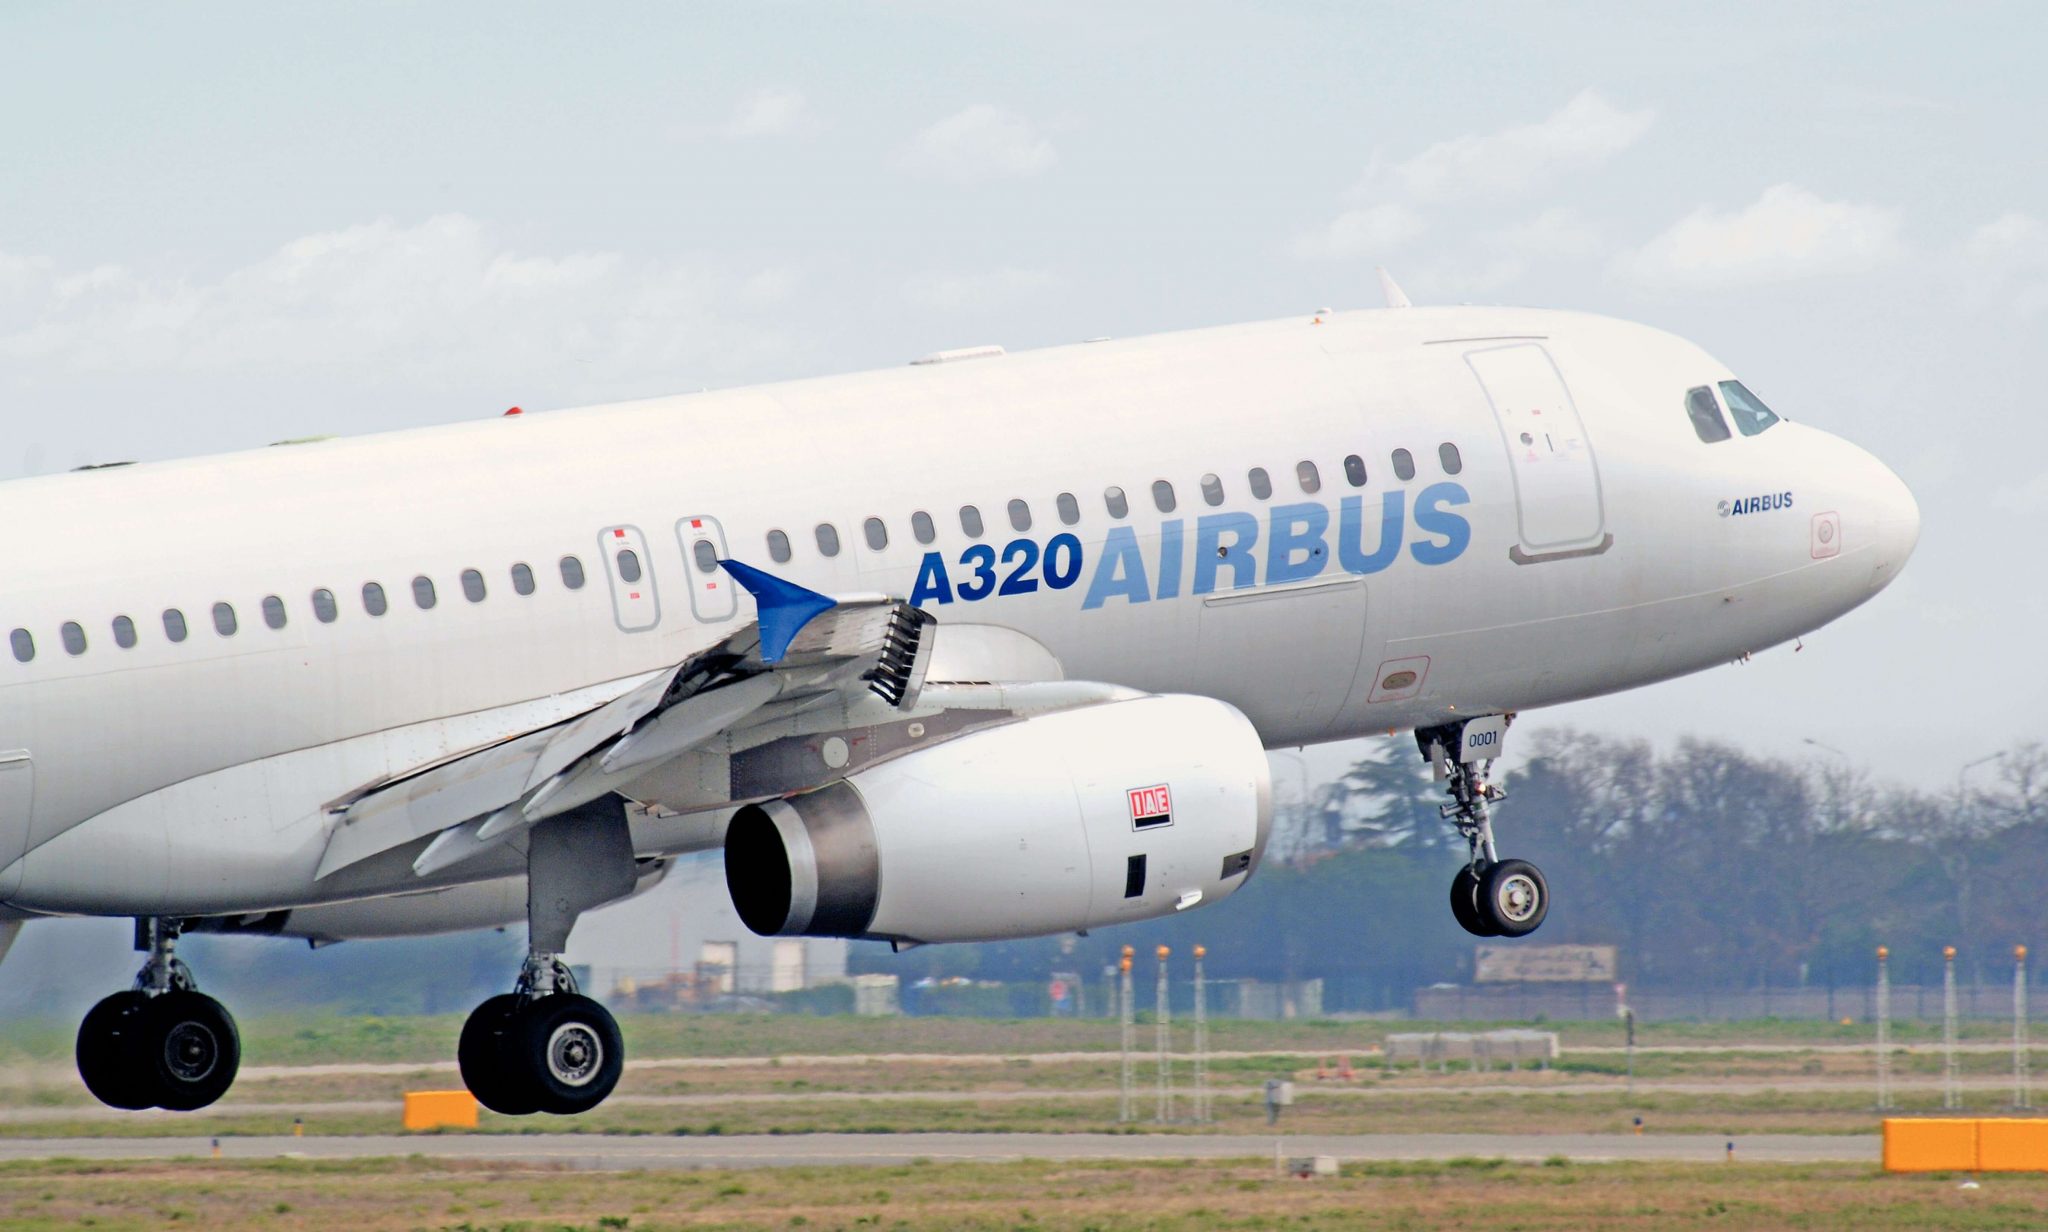 GOAL introduces additional A320neo aircraft to its fleet for KGAL investors